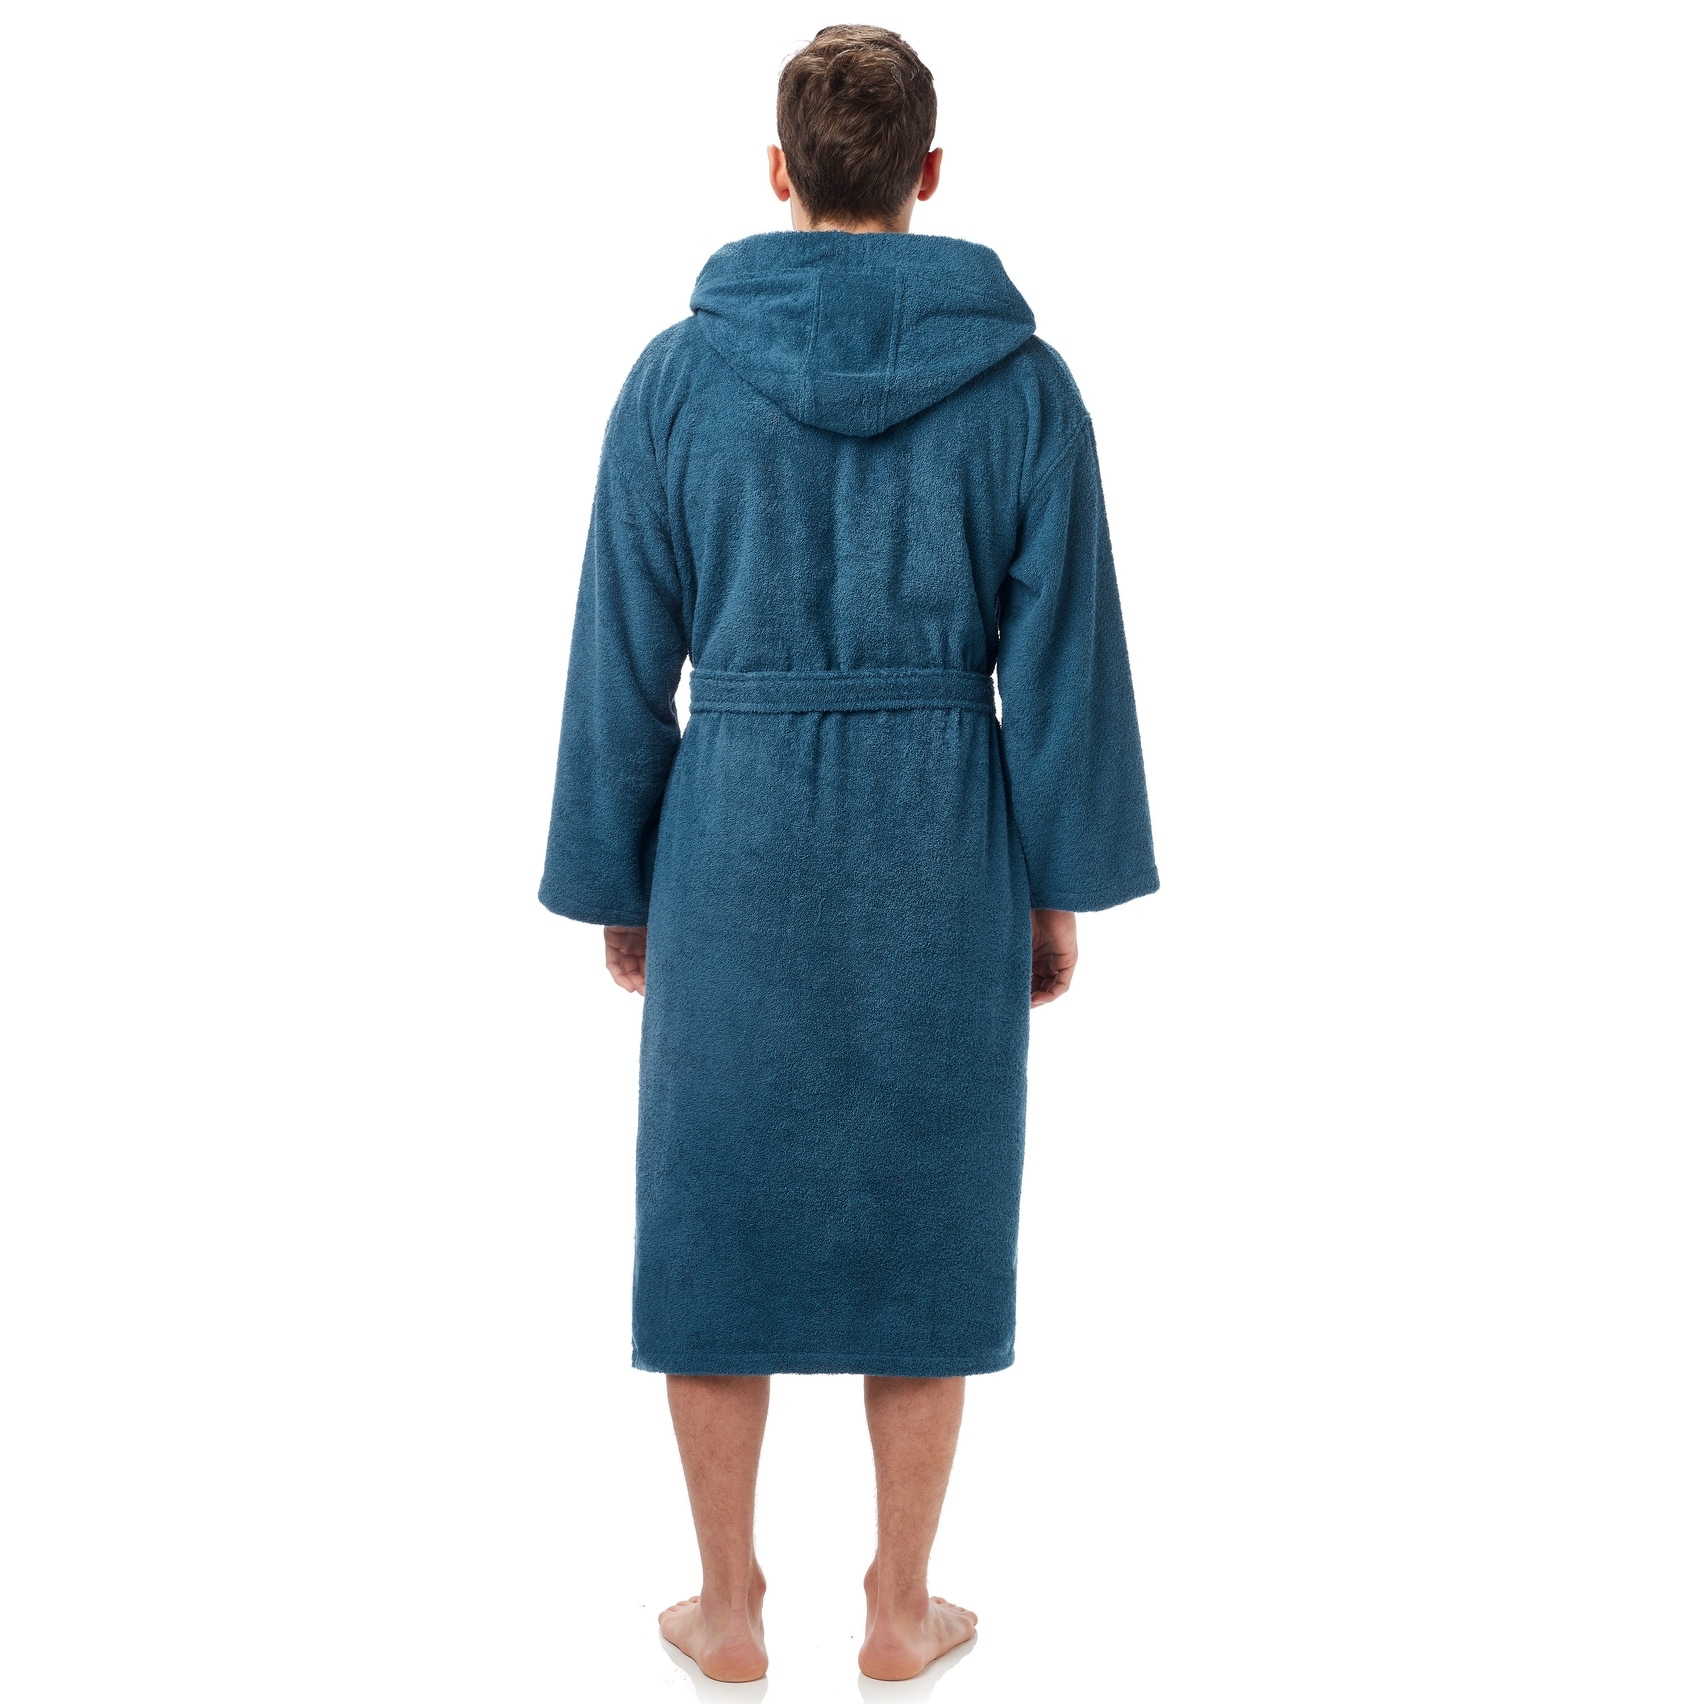 https://ak1.ostkcdn.com/images/products/is/images/direct/b534f0eb11c54c5f8ce209777aaf86ad80662d9f/Men%27s-Turkish-Cotton-Hooded-Bathrobe.jpg